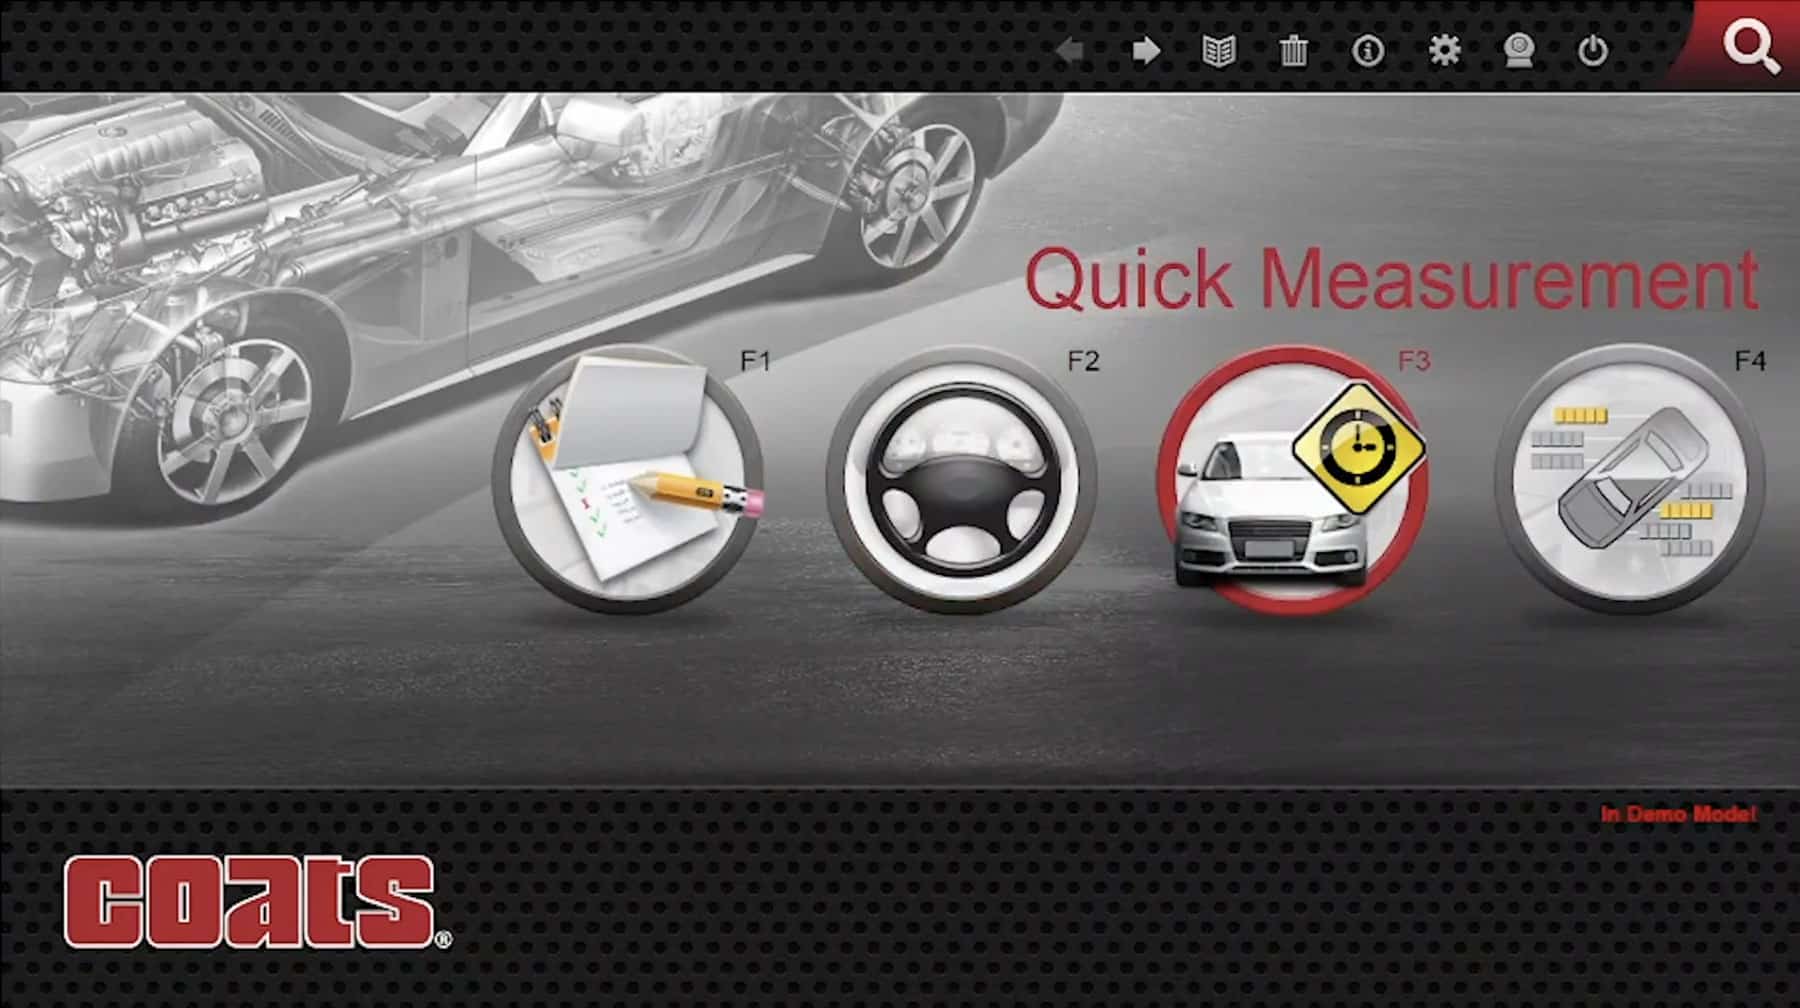 The desktop monitor of the Coats wheel aligner shows the main menu selection with “Quick Measurement” as the highlighted, selected mode